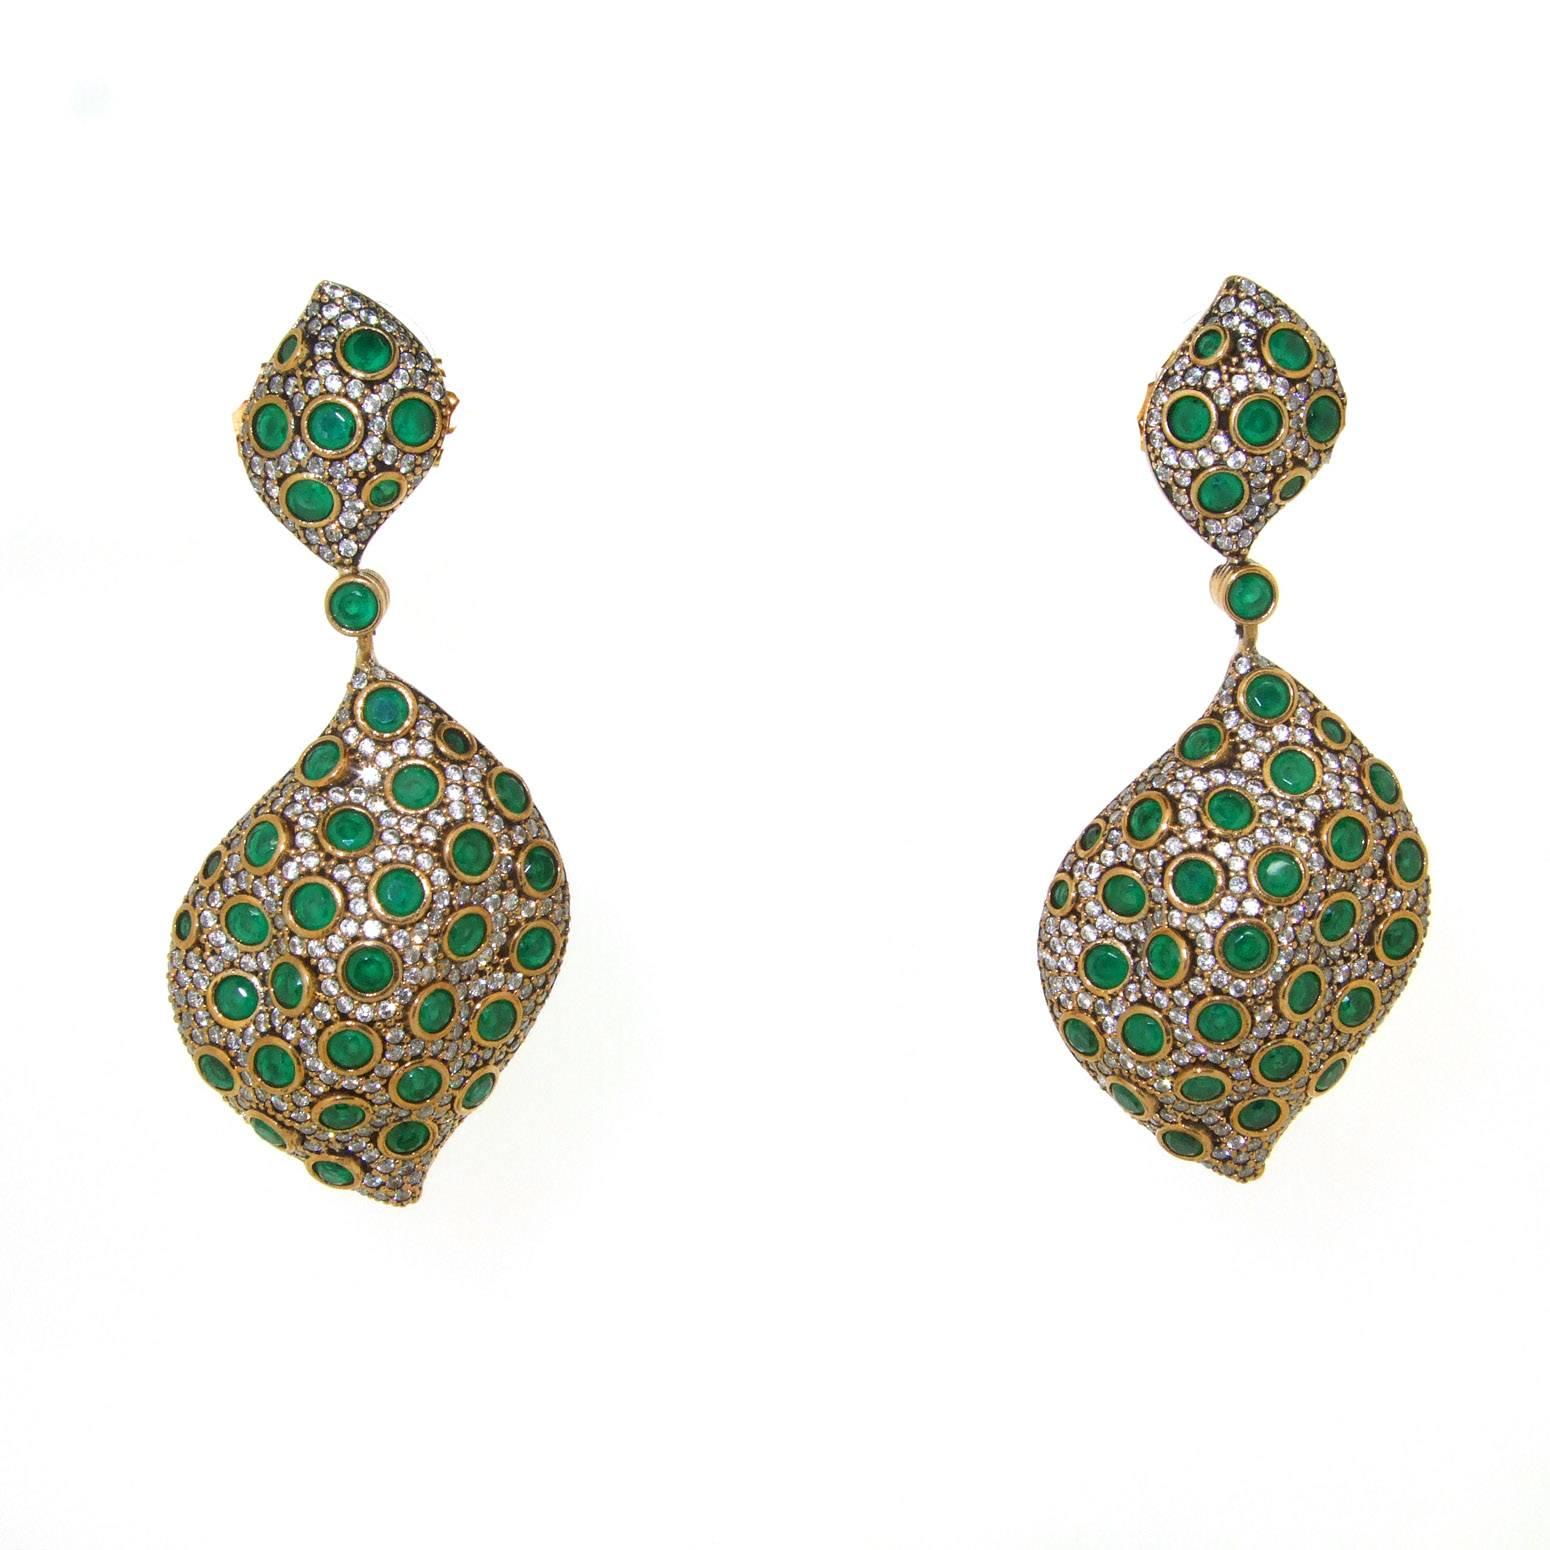 A beautiful pair of pierced earrings by JCM London set with green and clear crystals, emulating emeralds and diamonds. Set in gold plated costume metal.

They measure 7cm drop by 1.5cm wide at the top and 2.8cm wide at the lower section, 1.8cm deep.